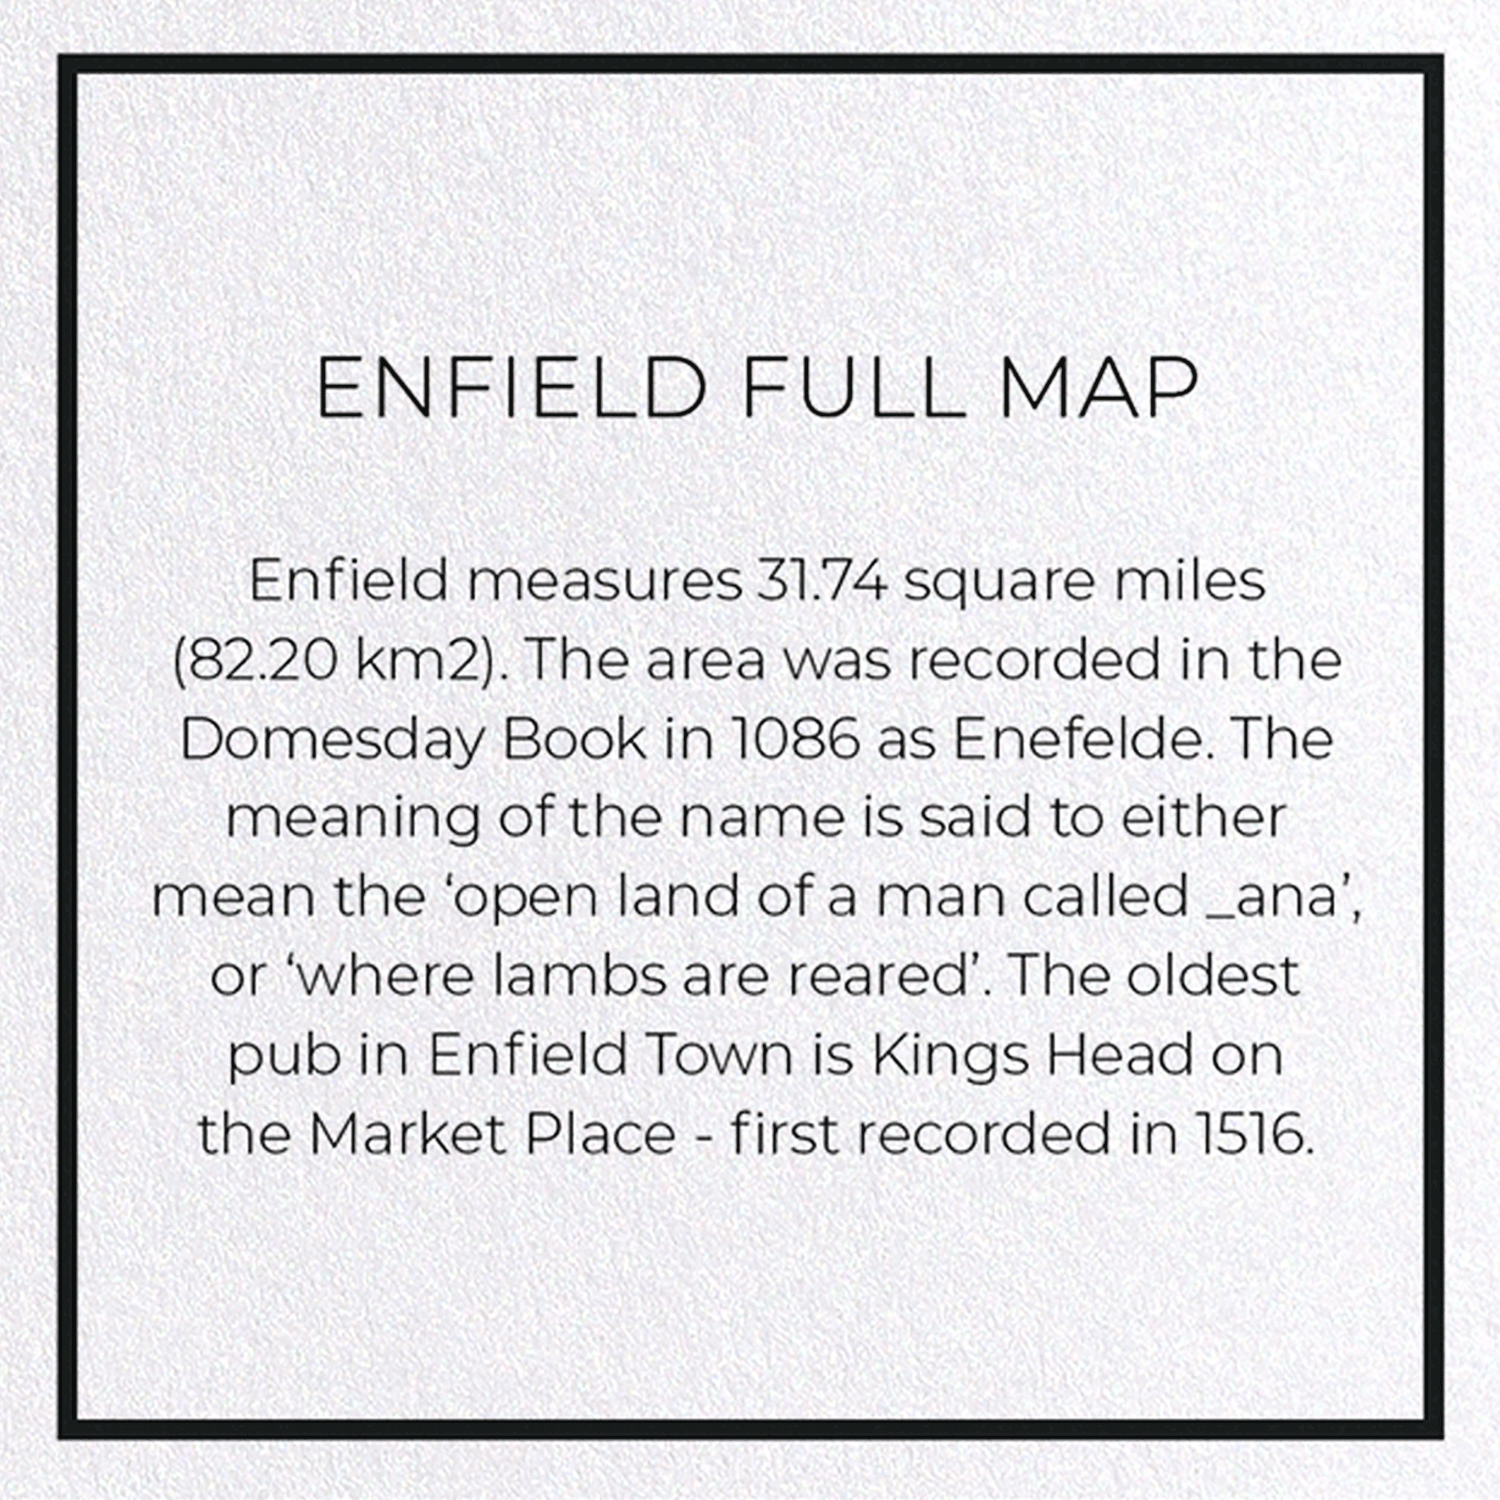 ENFIELD FULL MAP